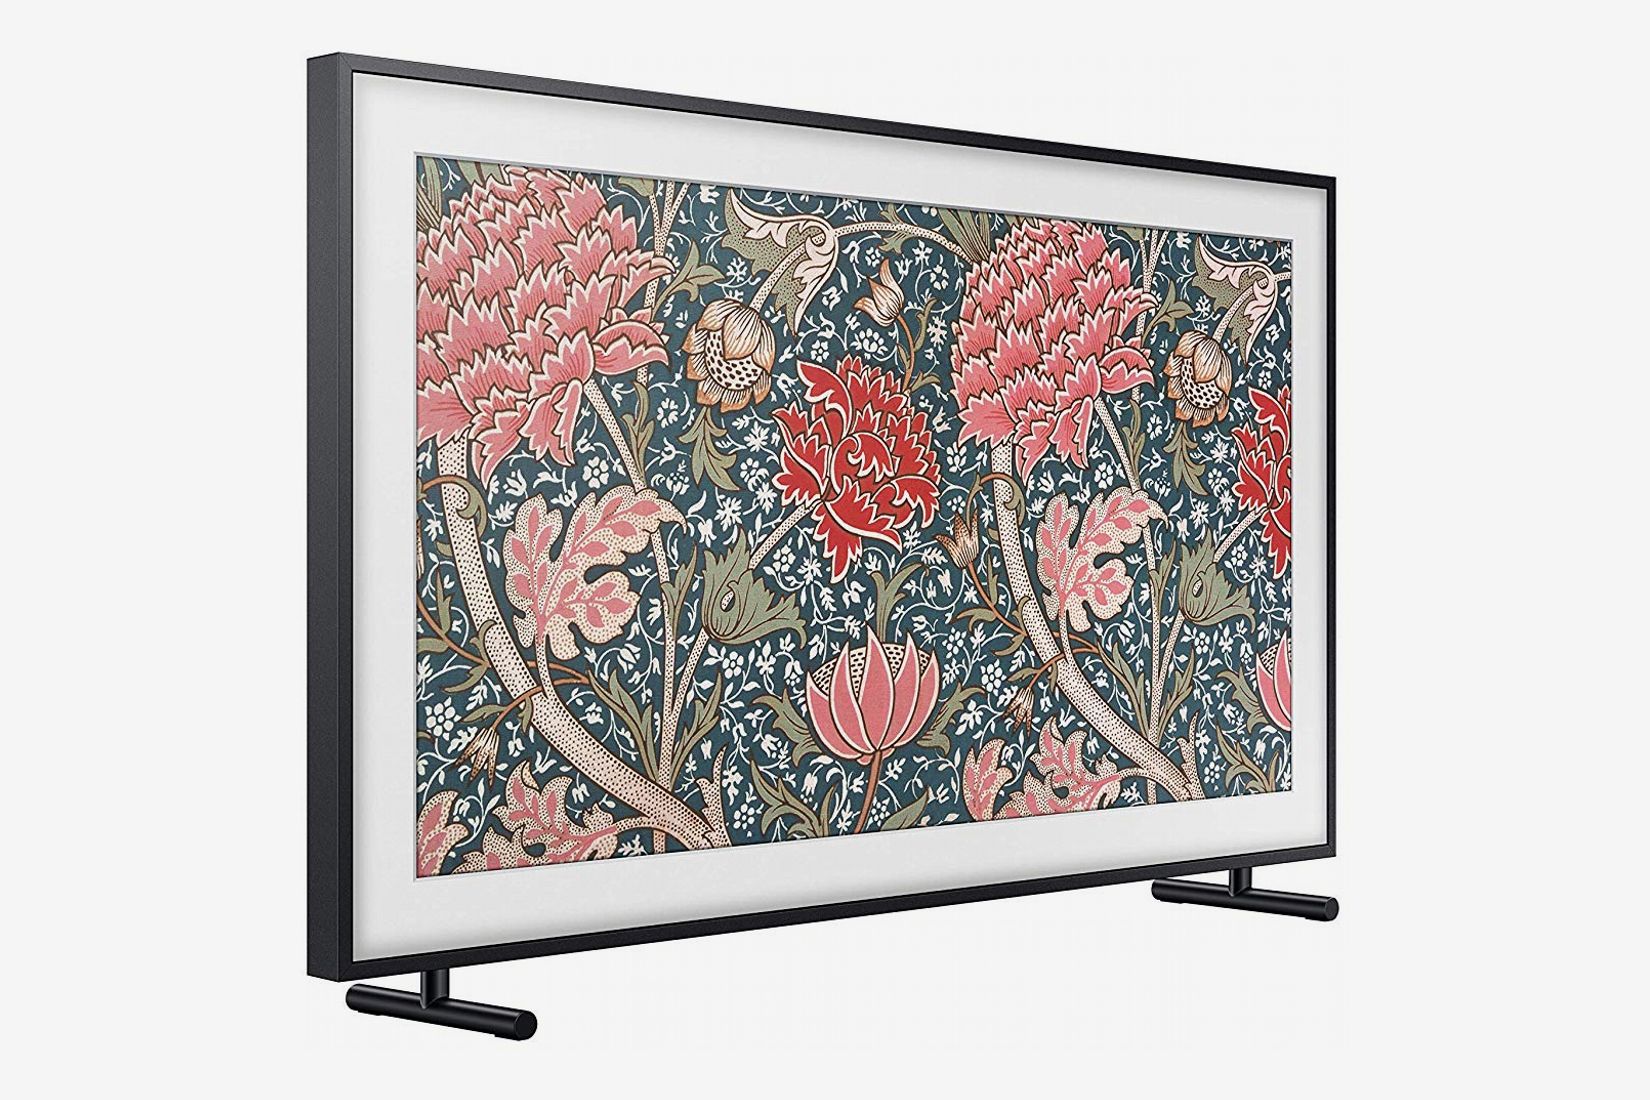 Samsung Frame 55-Inch QLED TV on Sale at Amazon 2019